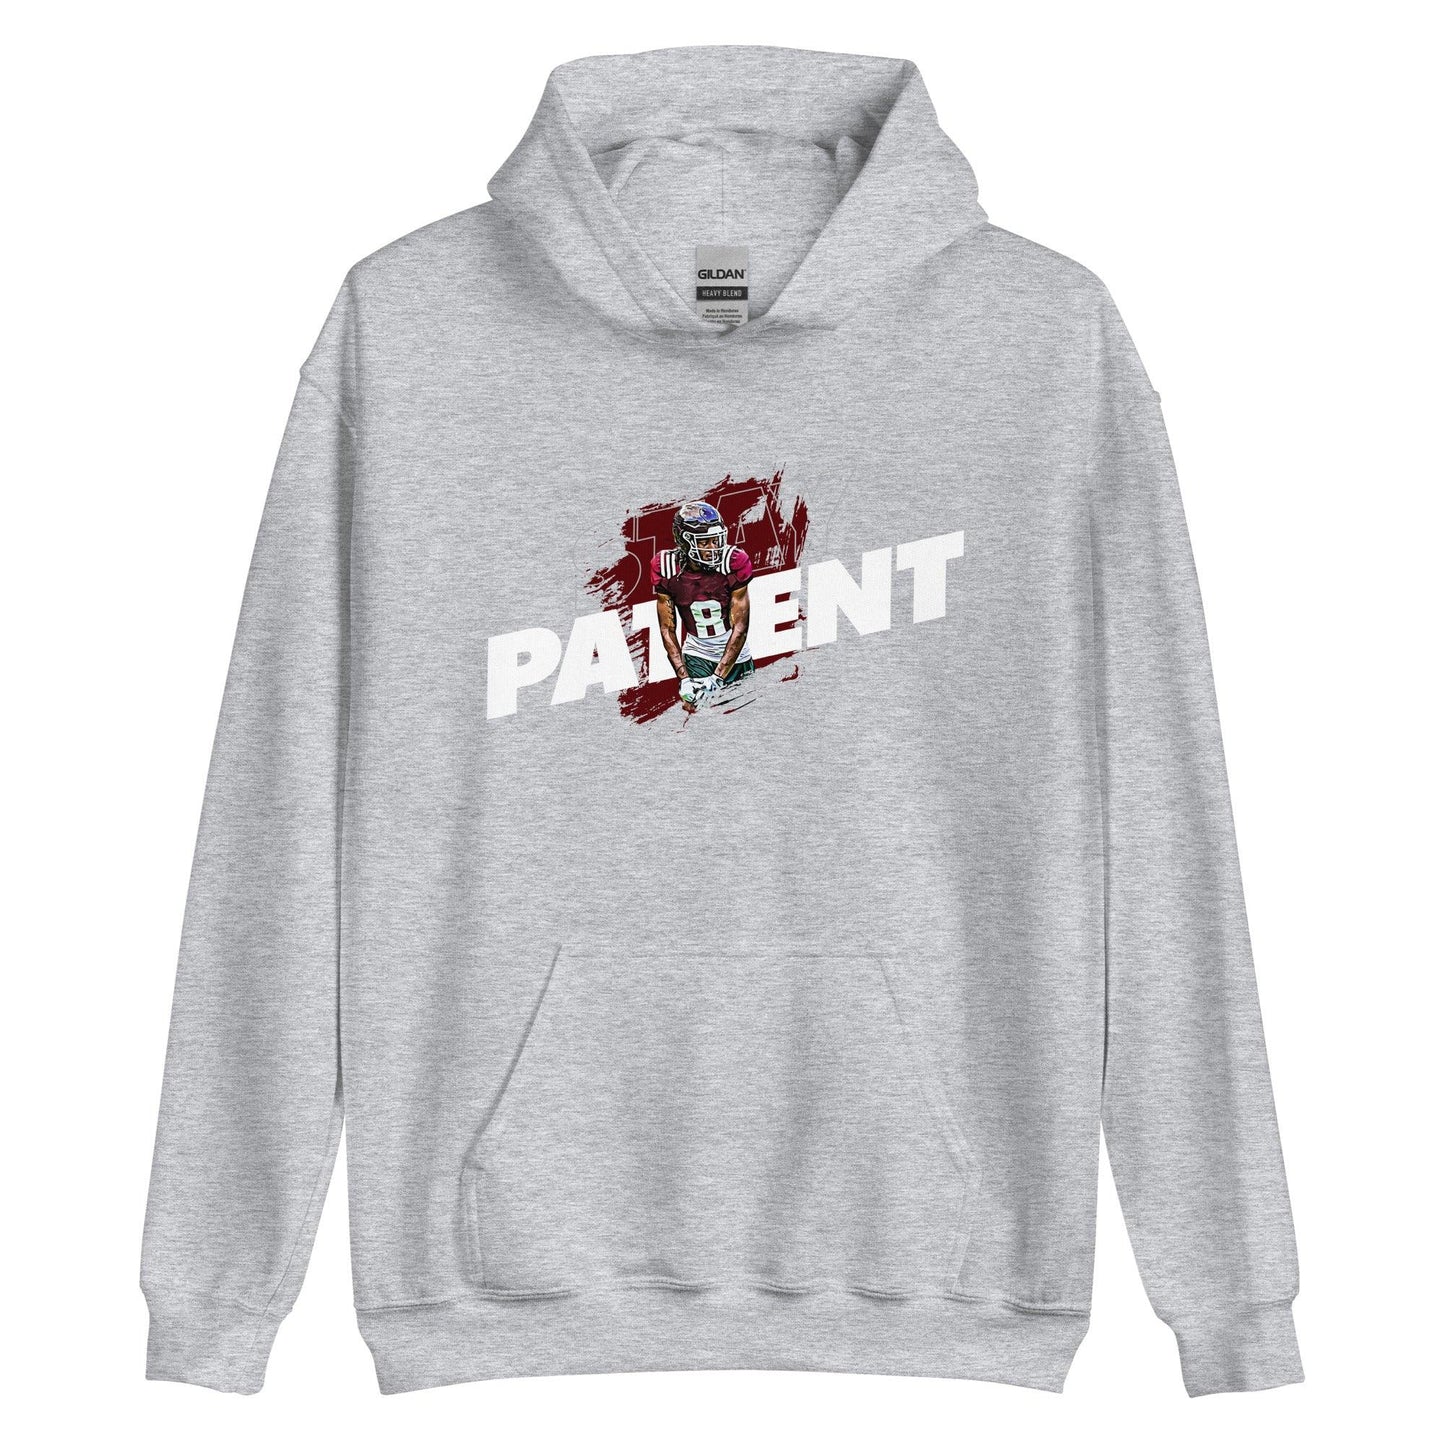 Yulkeith Brown "Stay Patient" Hoodie - Fan Arch